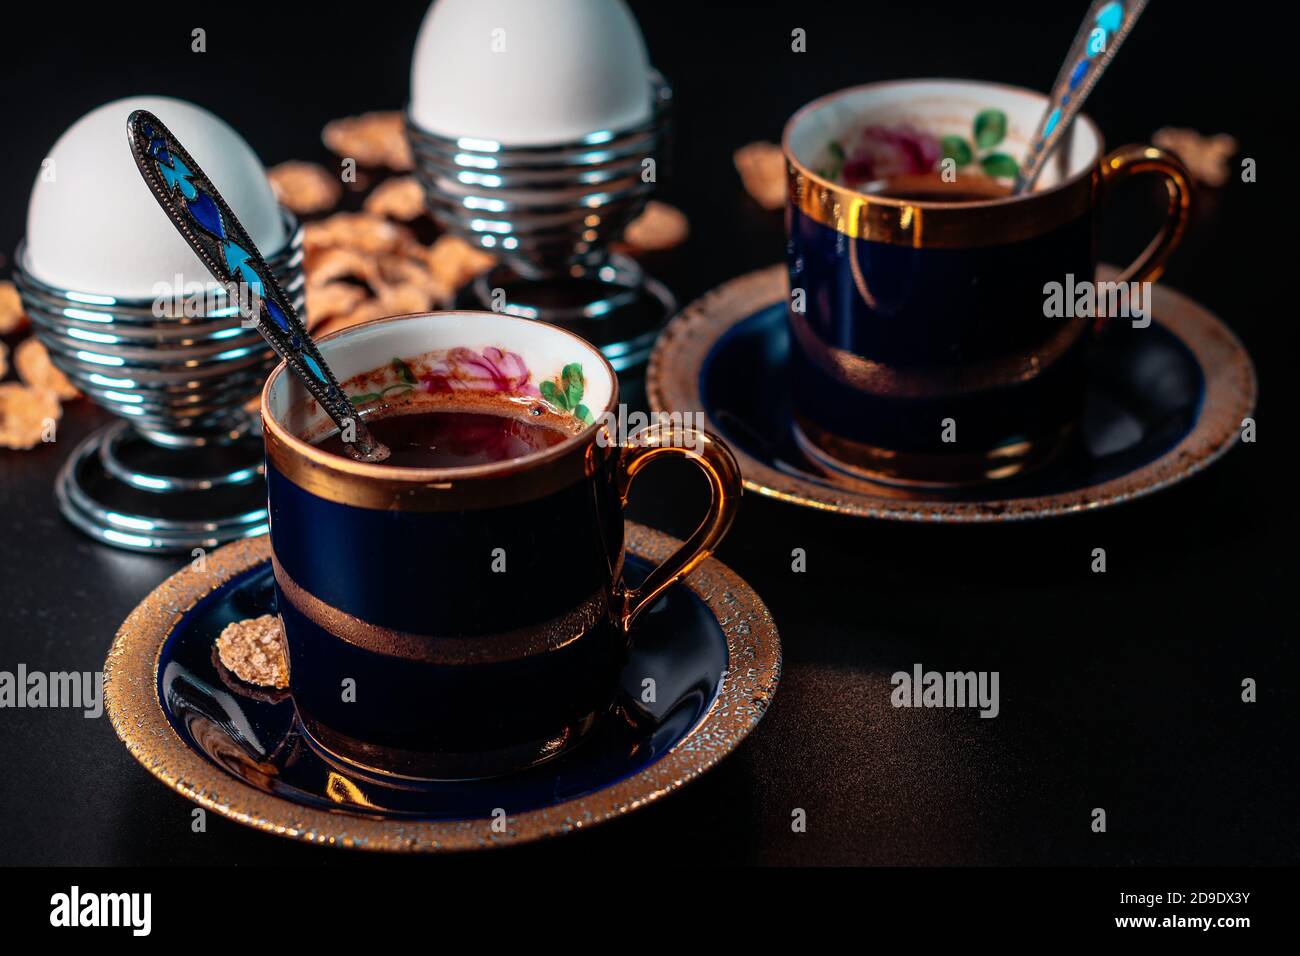 Gourmet breakfast. Two antique enamel cobalt gold rimmed cups of coffee and two boiled eggs on a silver stand on a black background Stock Photo